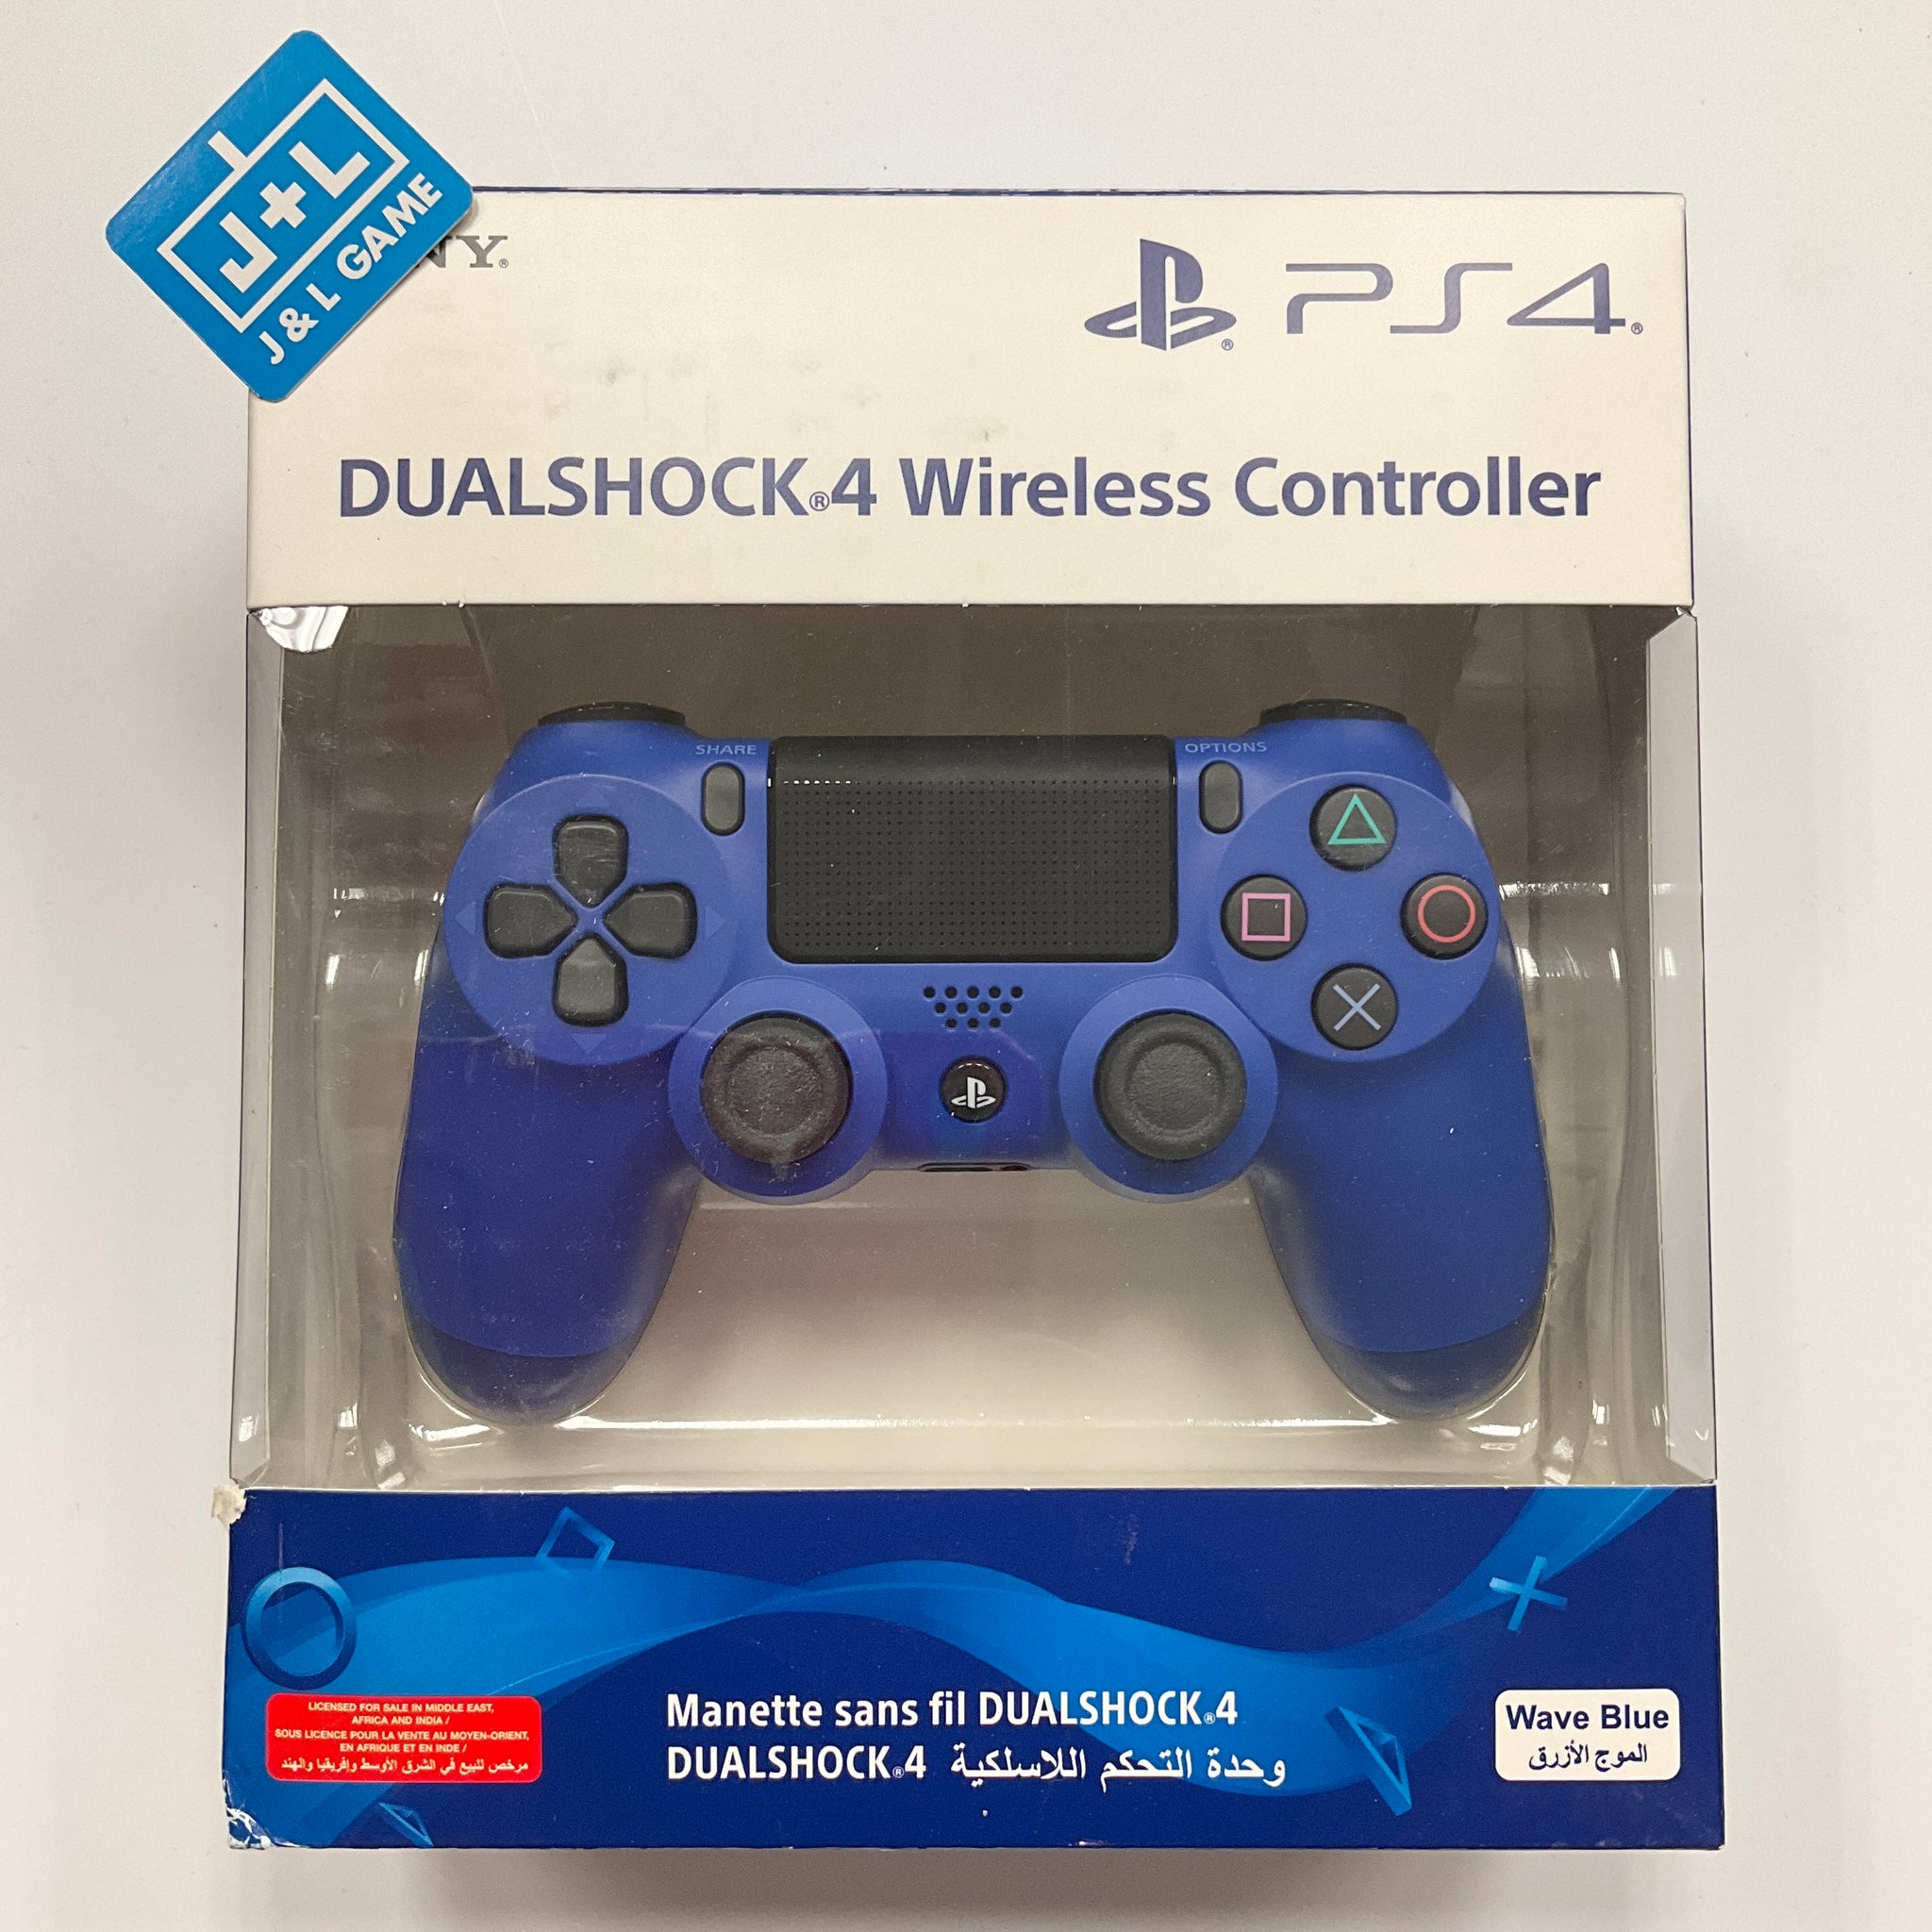 SONY 4 Dualshock 4 Controller (Wave Blue) - (PS4) – J&L Video Games New York City